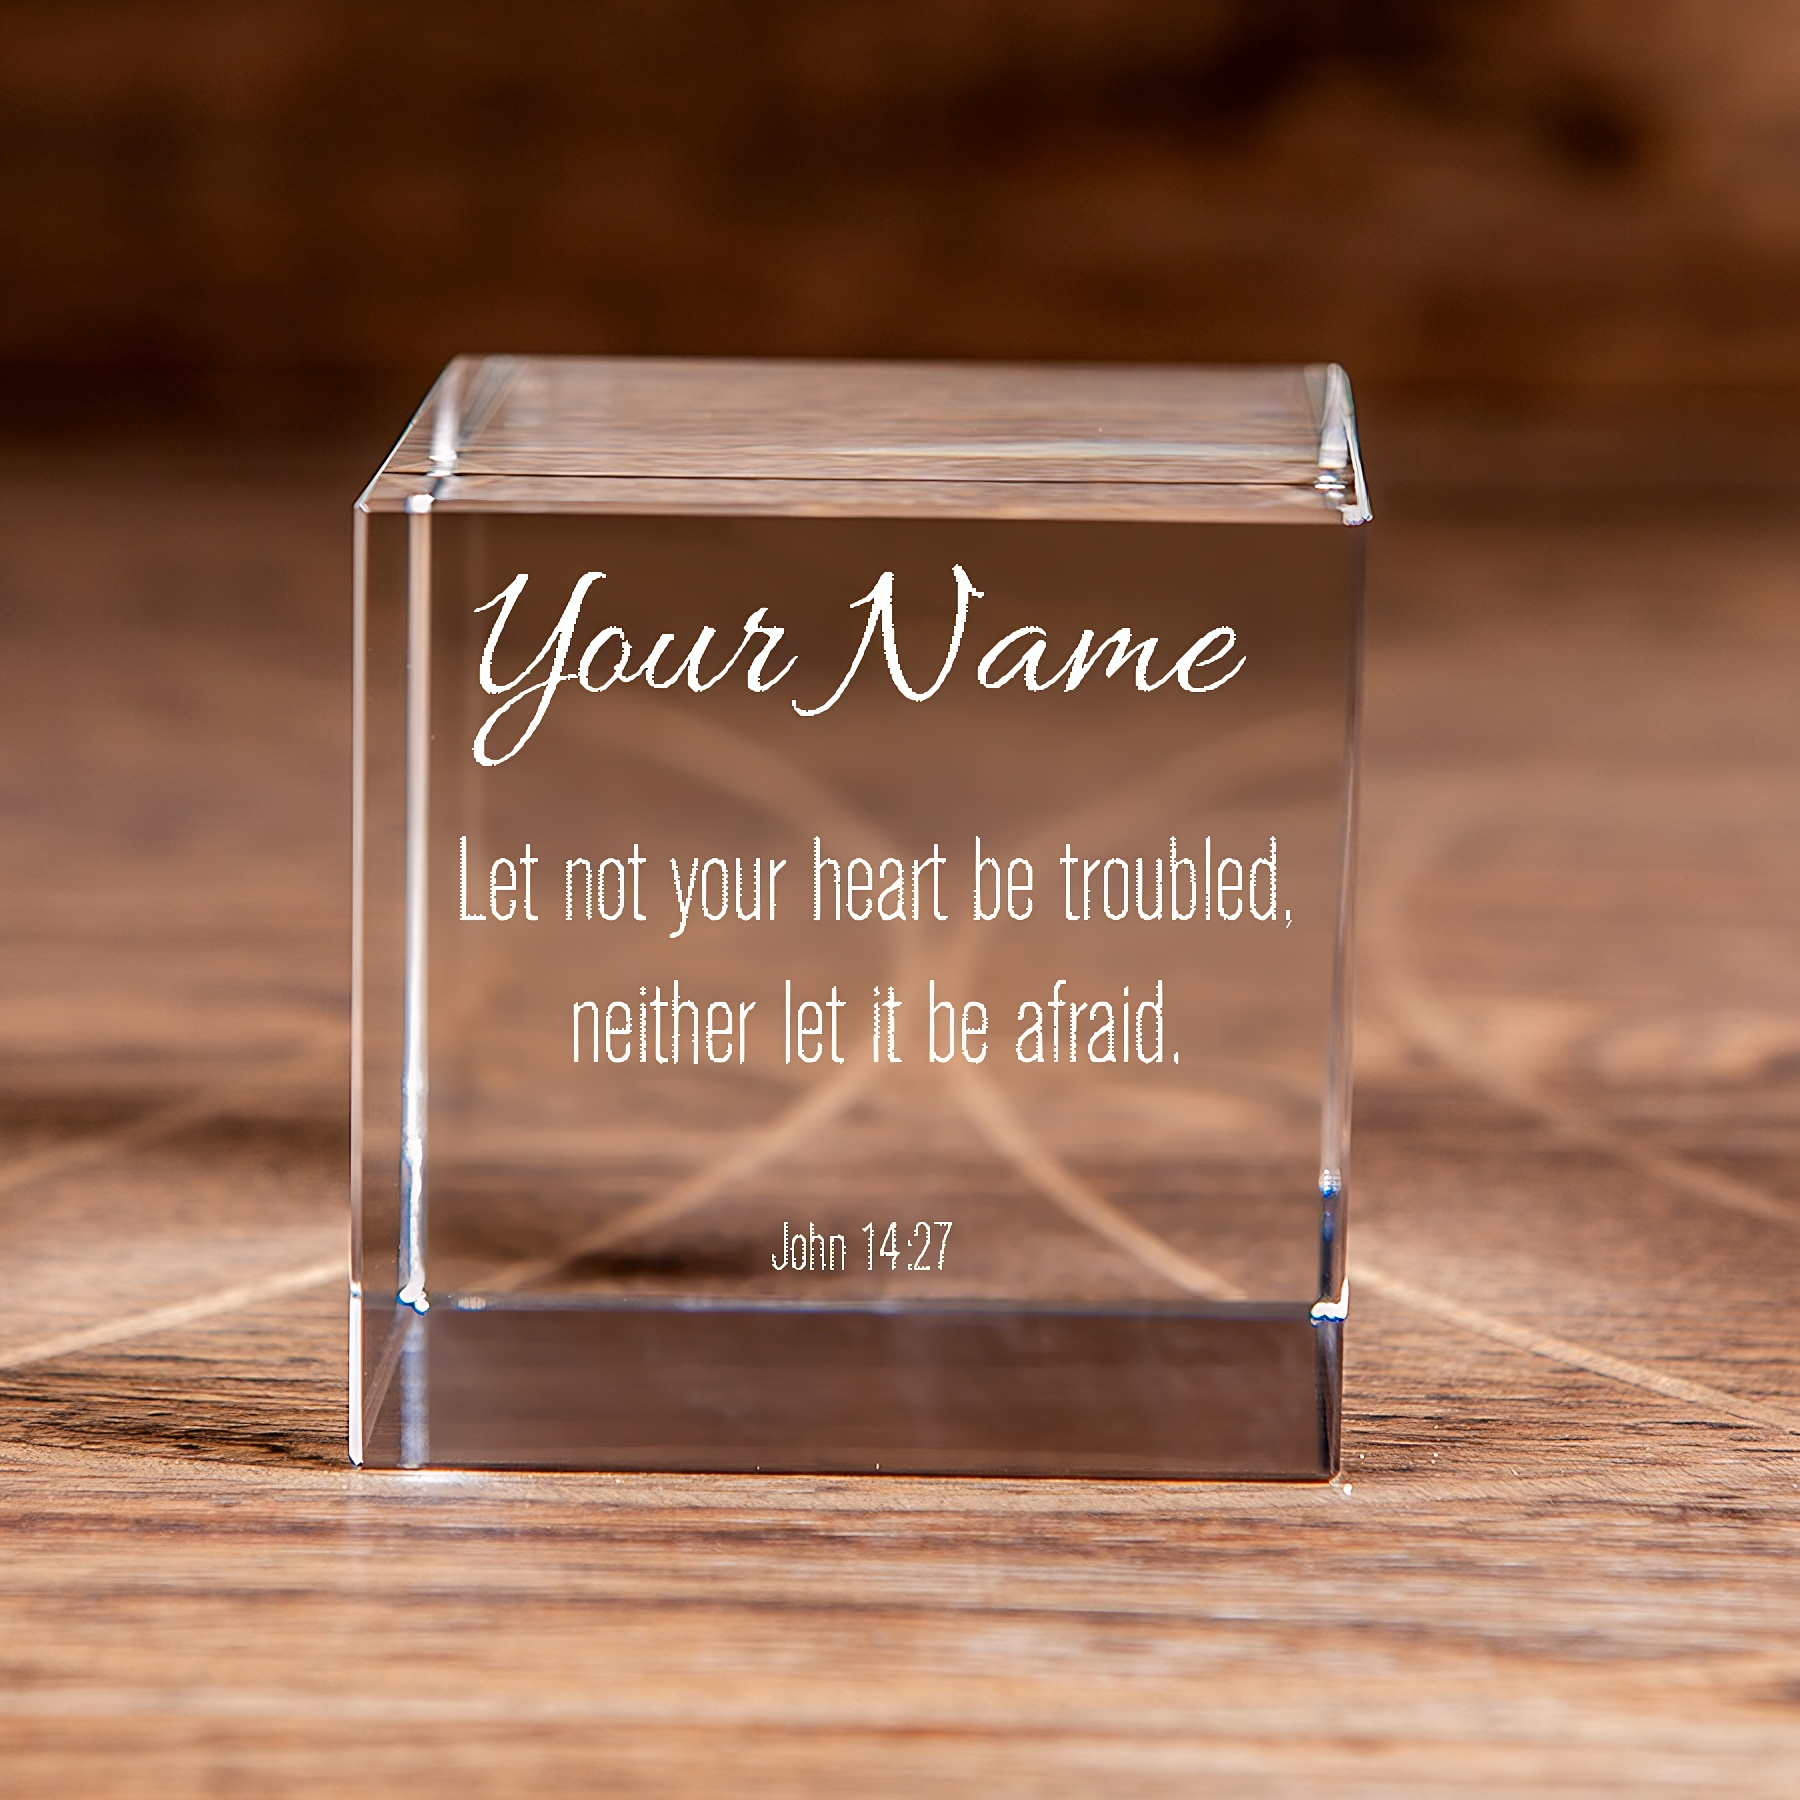 John 14:27 Square Cut Crystal Cube No Fear No Trouble Personalized Christian Gift-Express Your Love Gifts